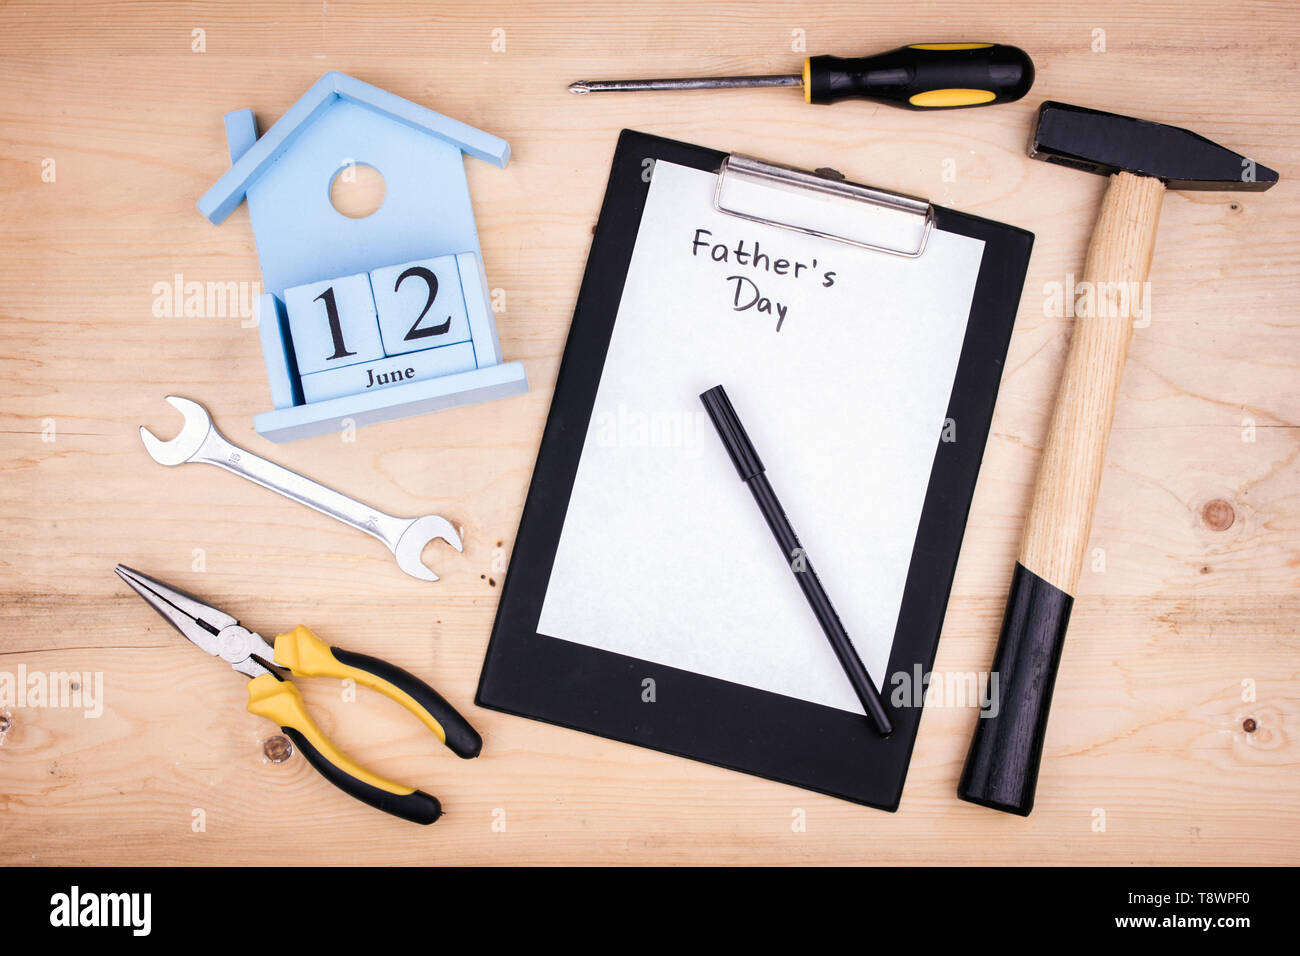 Repair tools - hammer, screwdrivers, adjustable wrenches, pliers. Sheet of  a white paper. Male concept for father's day 12 of June Stock Photo - Alamy